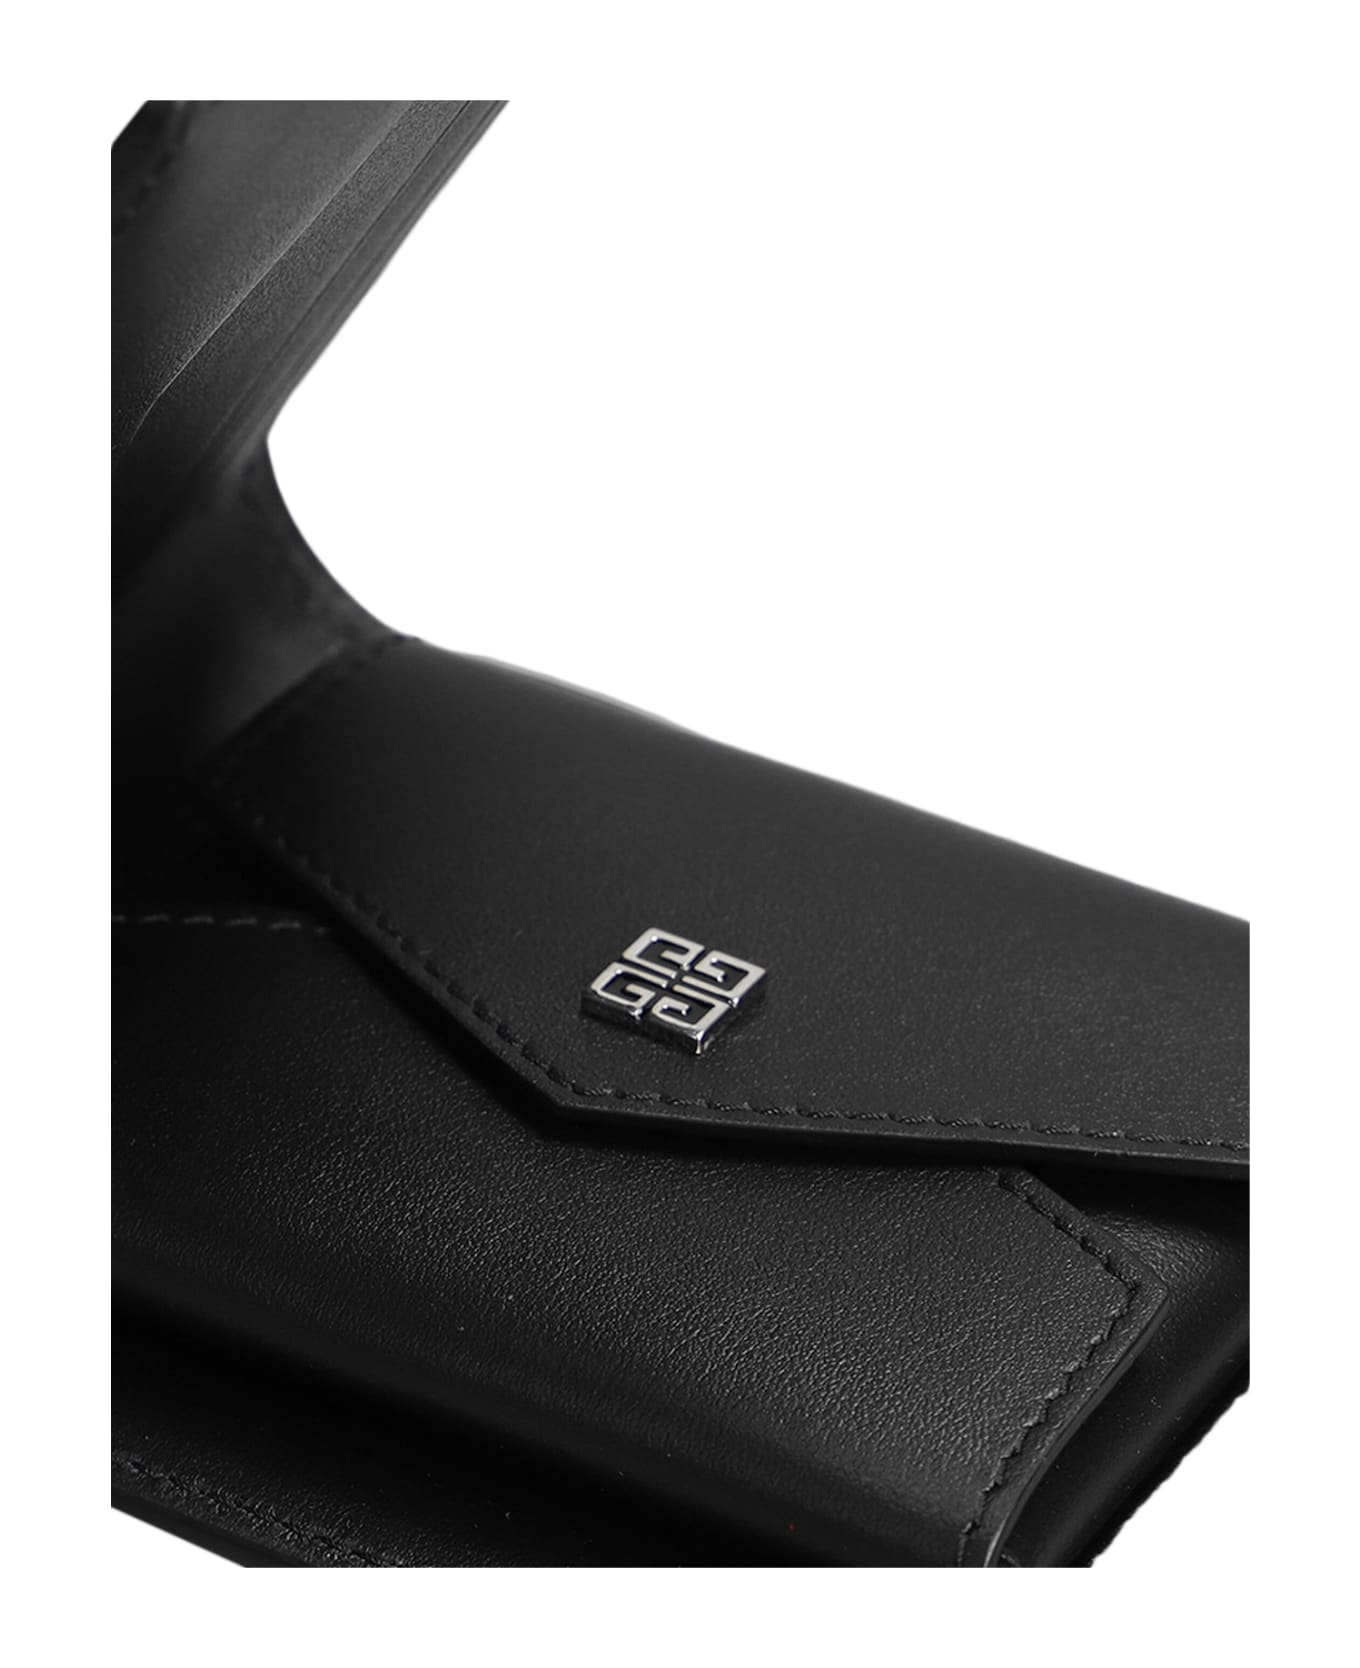 Givenchy Man Black Givenchy College Folding Wallet - Nero